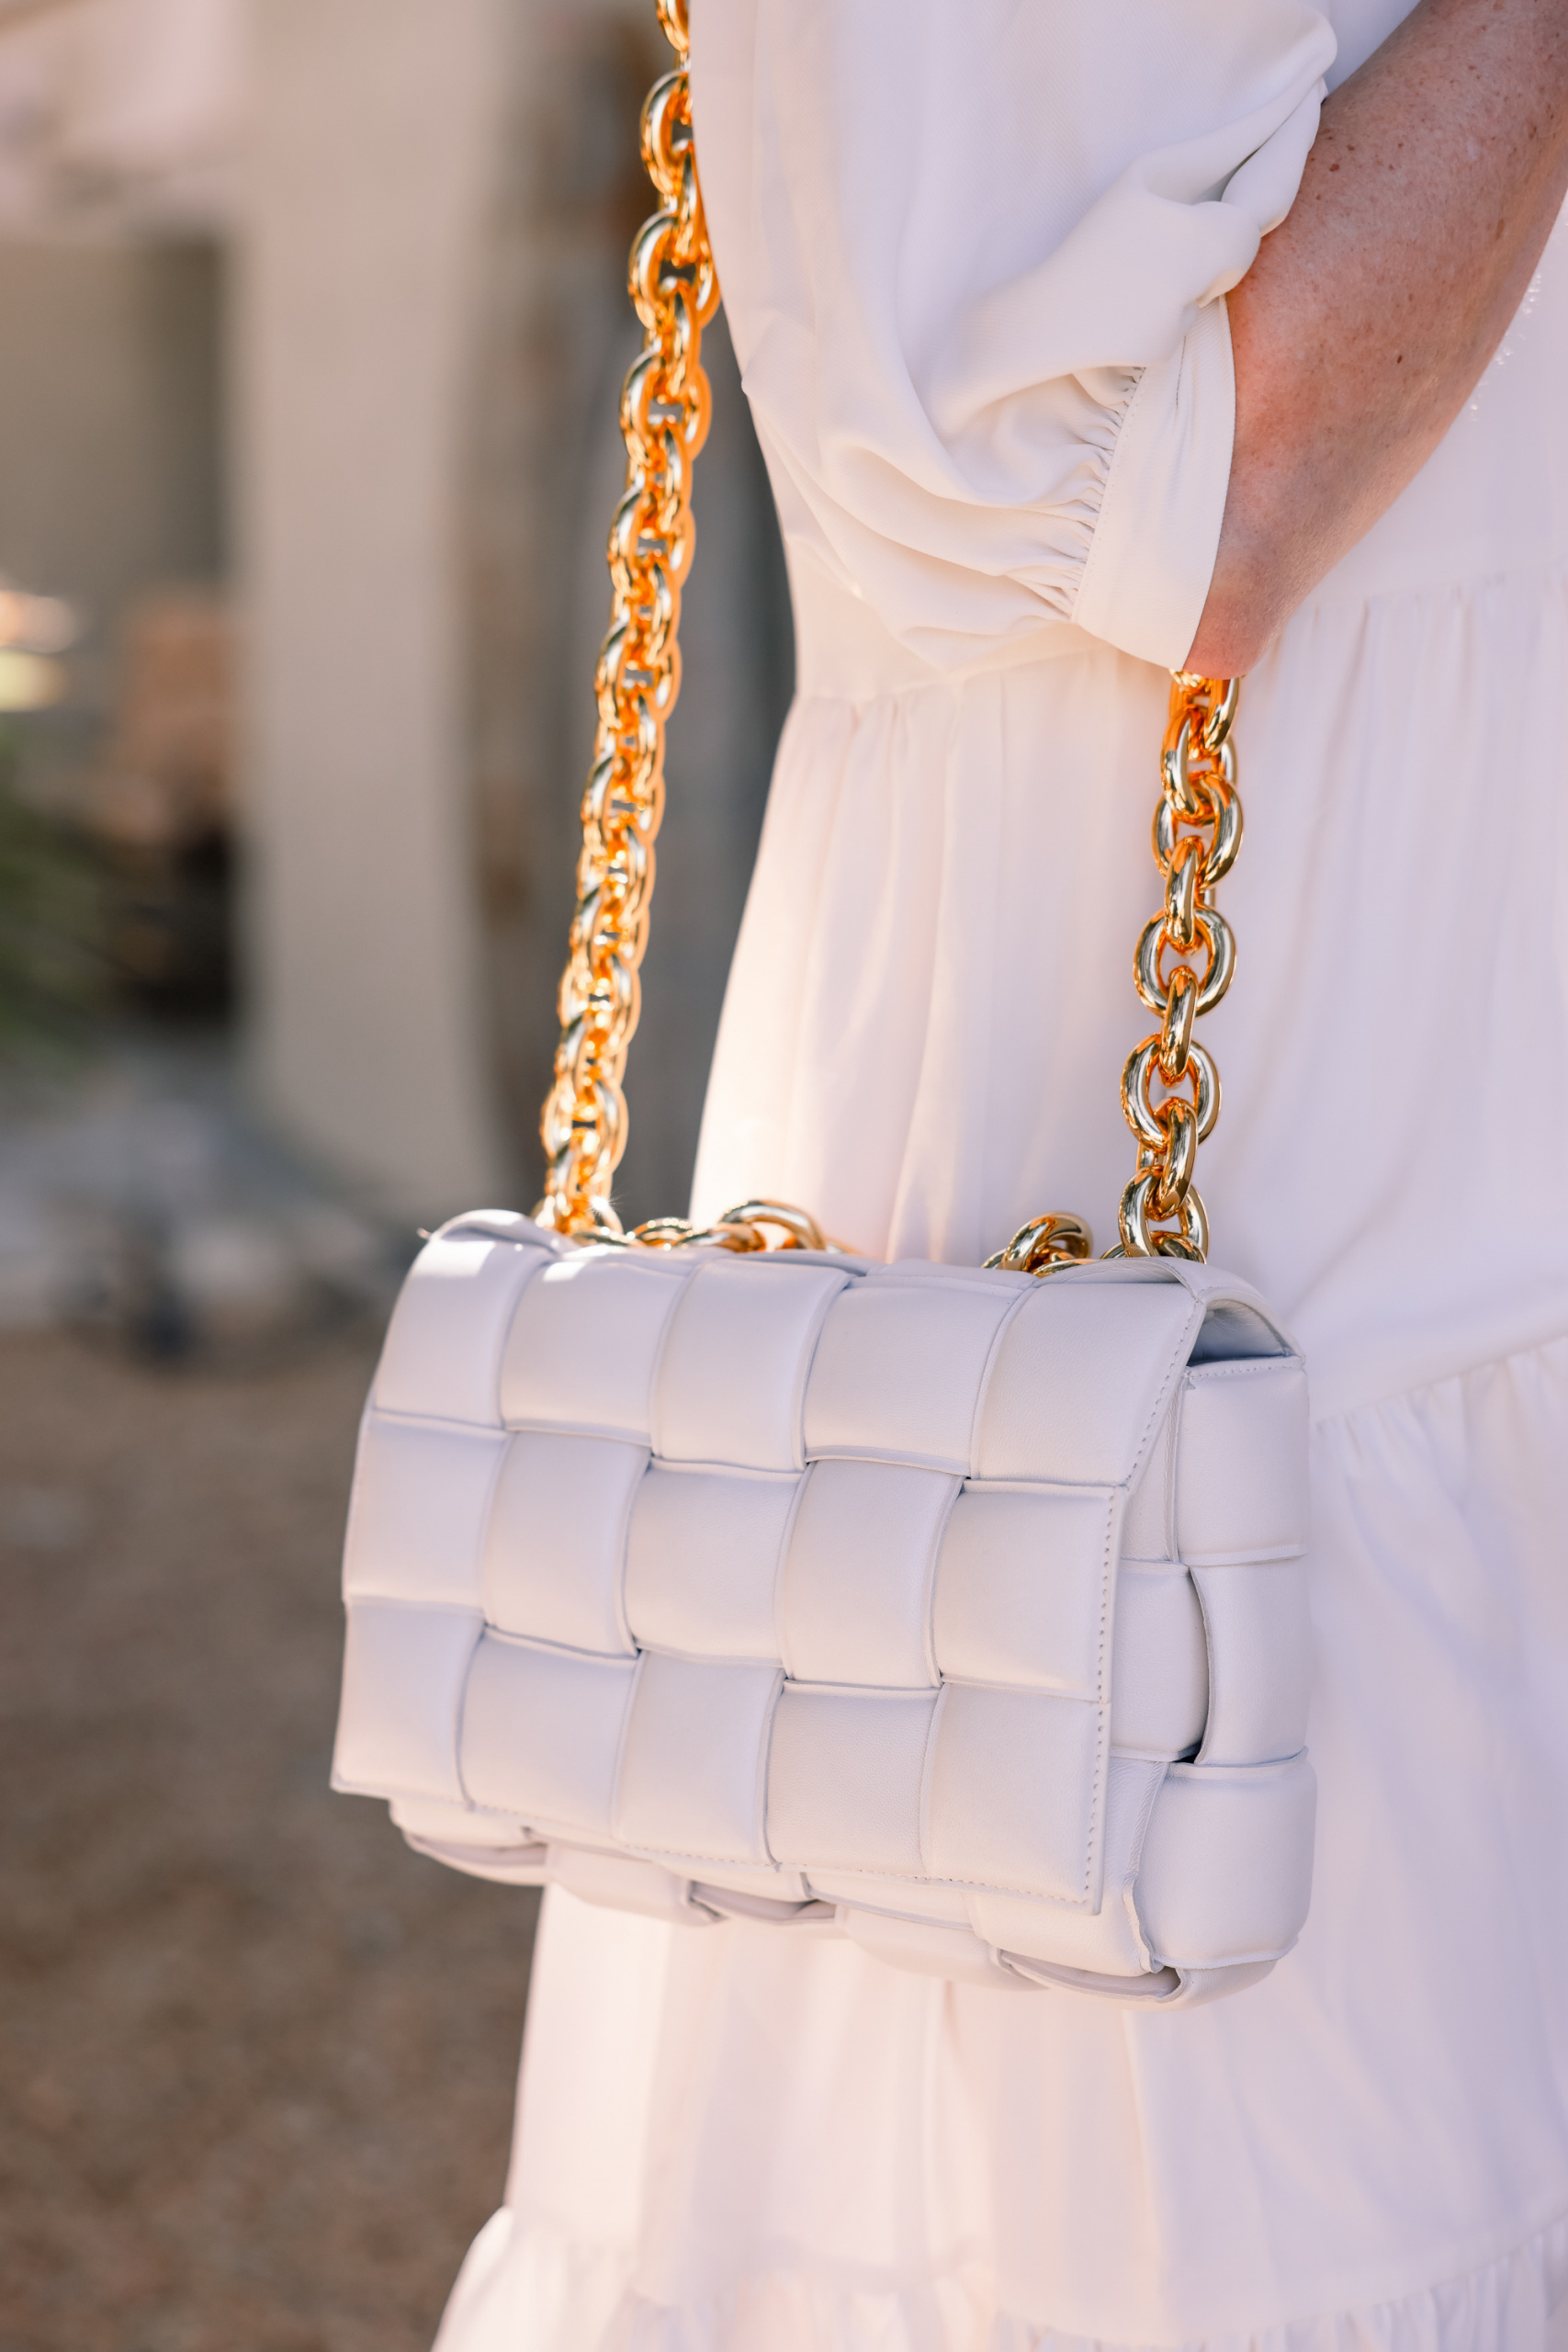 Honest review of Bottega Veneta Cassette Bag in White on fashion blogger over 40 Erin Busbee, perfect outfit formula, perfect summer outfit